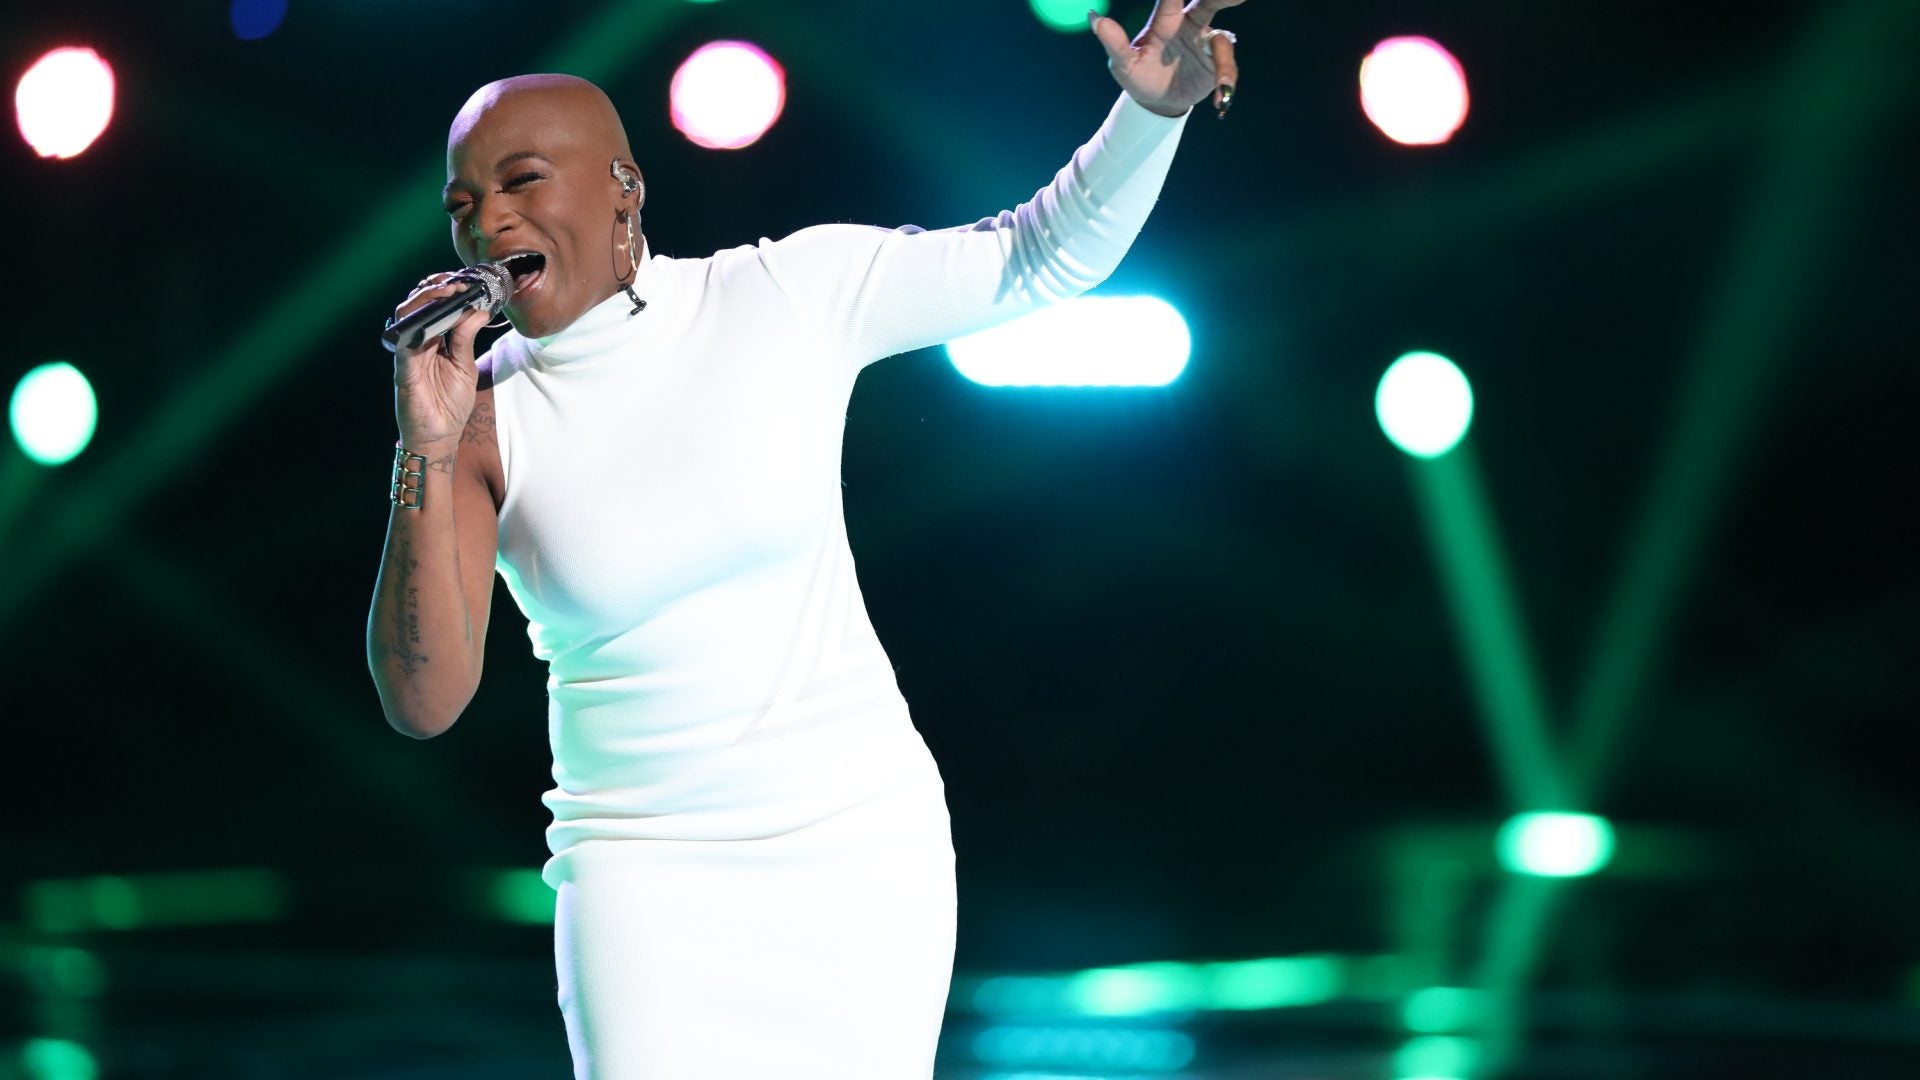 'The Voice' Singer Janice Freeman Has Passed Away At 33